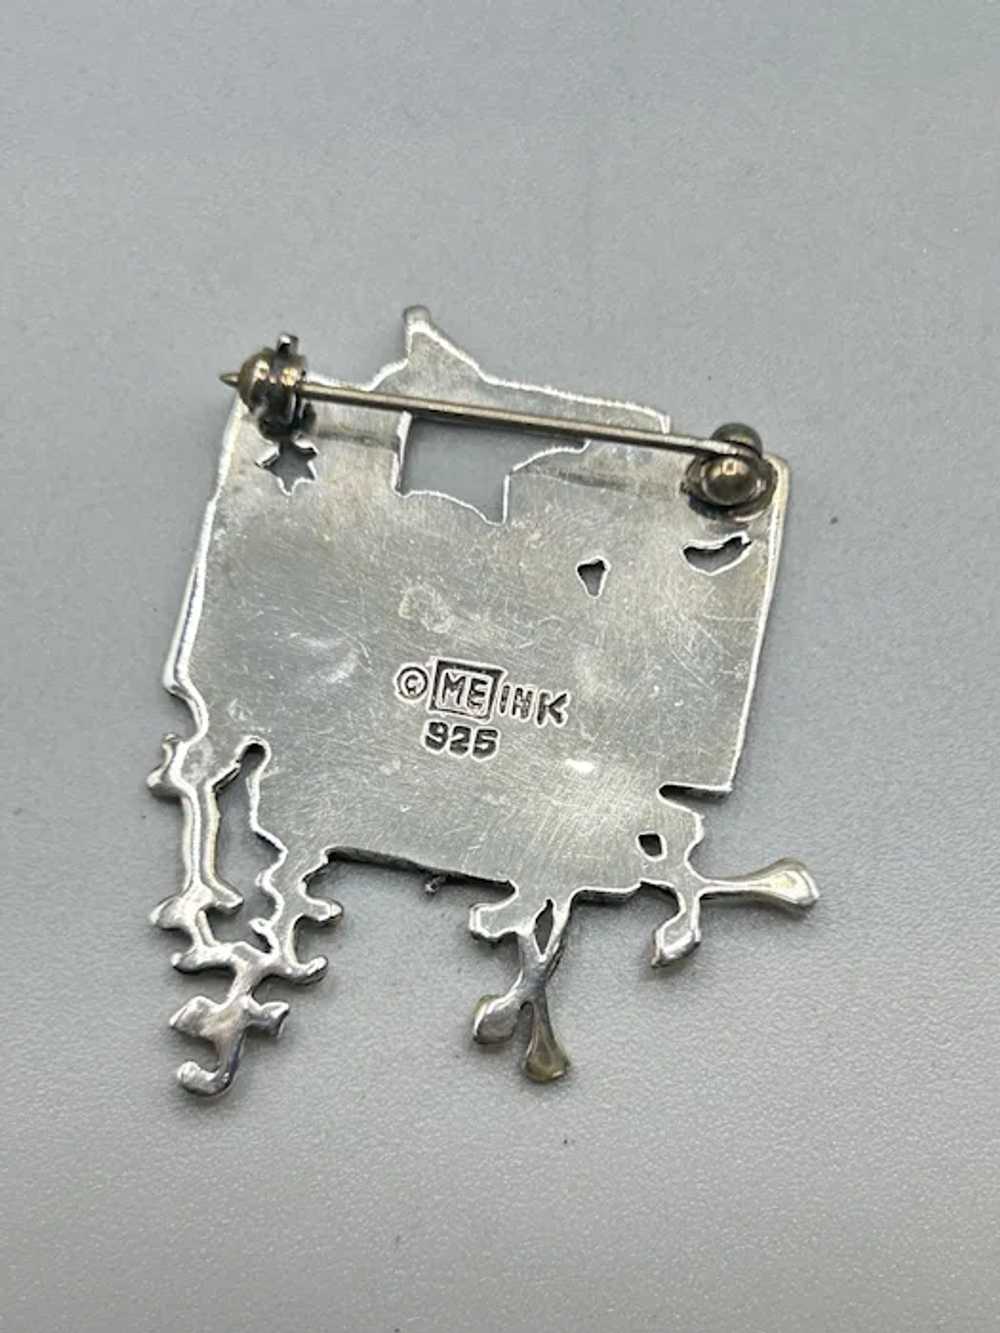 Meink 925 Signed Handcrafted Sterling Silver Pin … - image 5